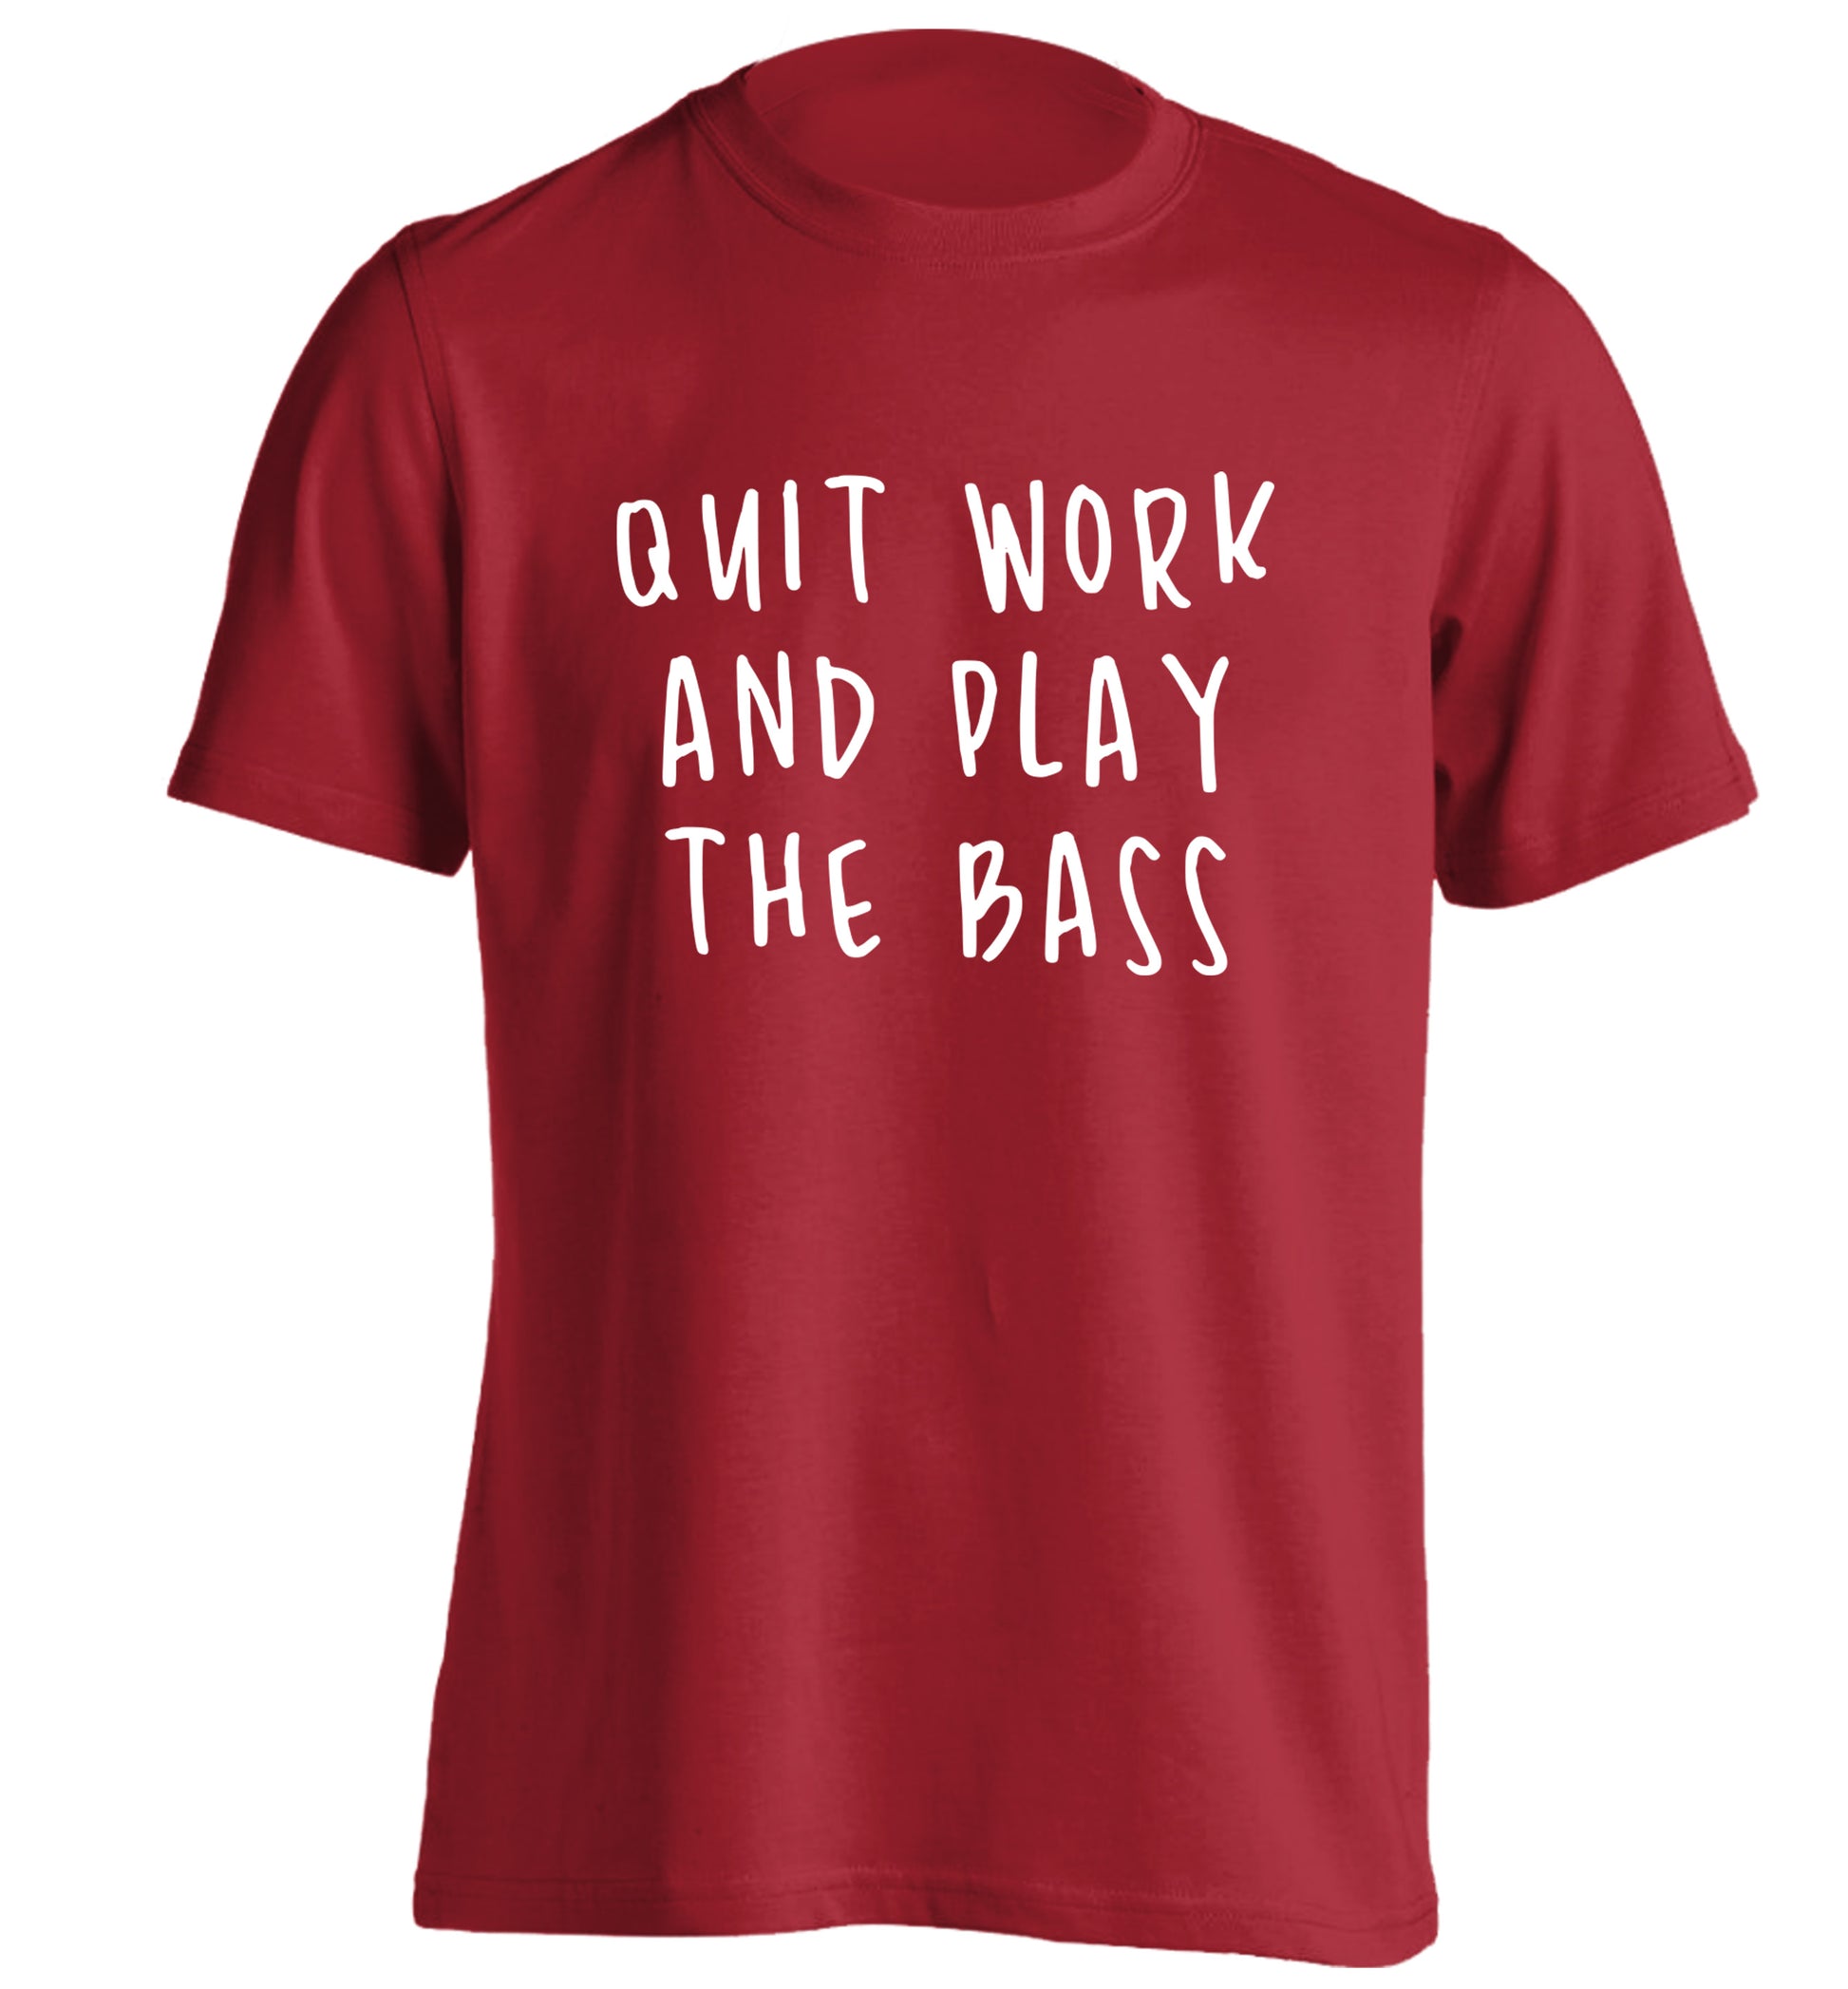 Quit work and play the bass adults unisex red Tshirt 2XL